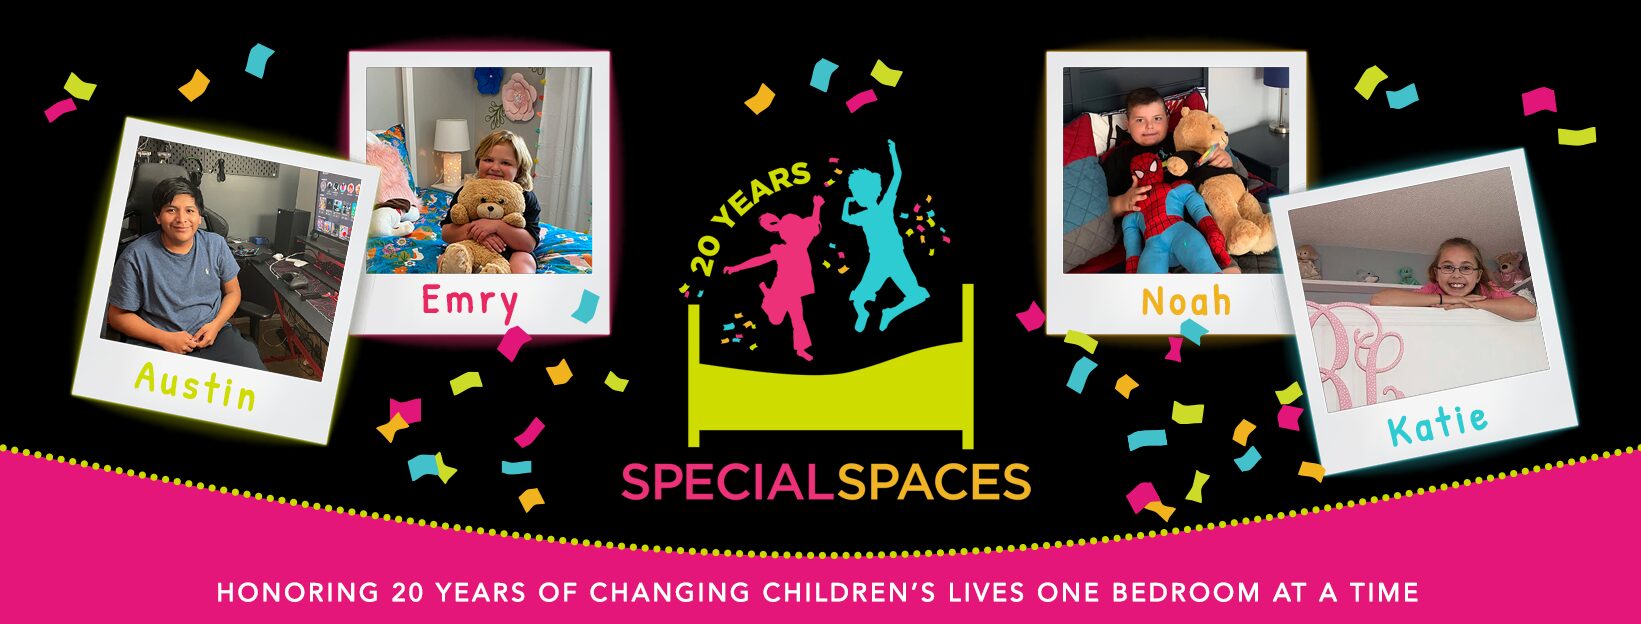 Honoring 20 years of Changing Children's Lives One Bedroom at a Time